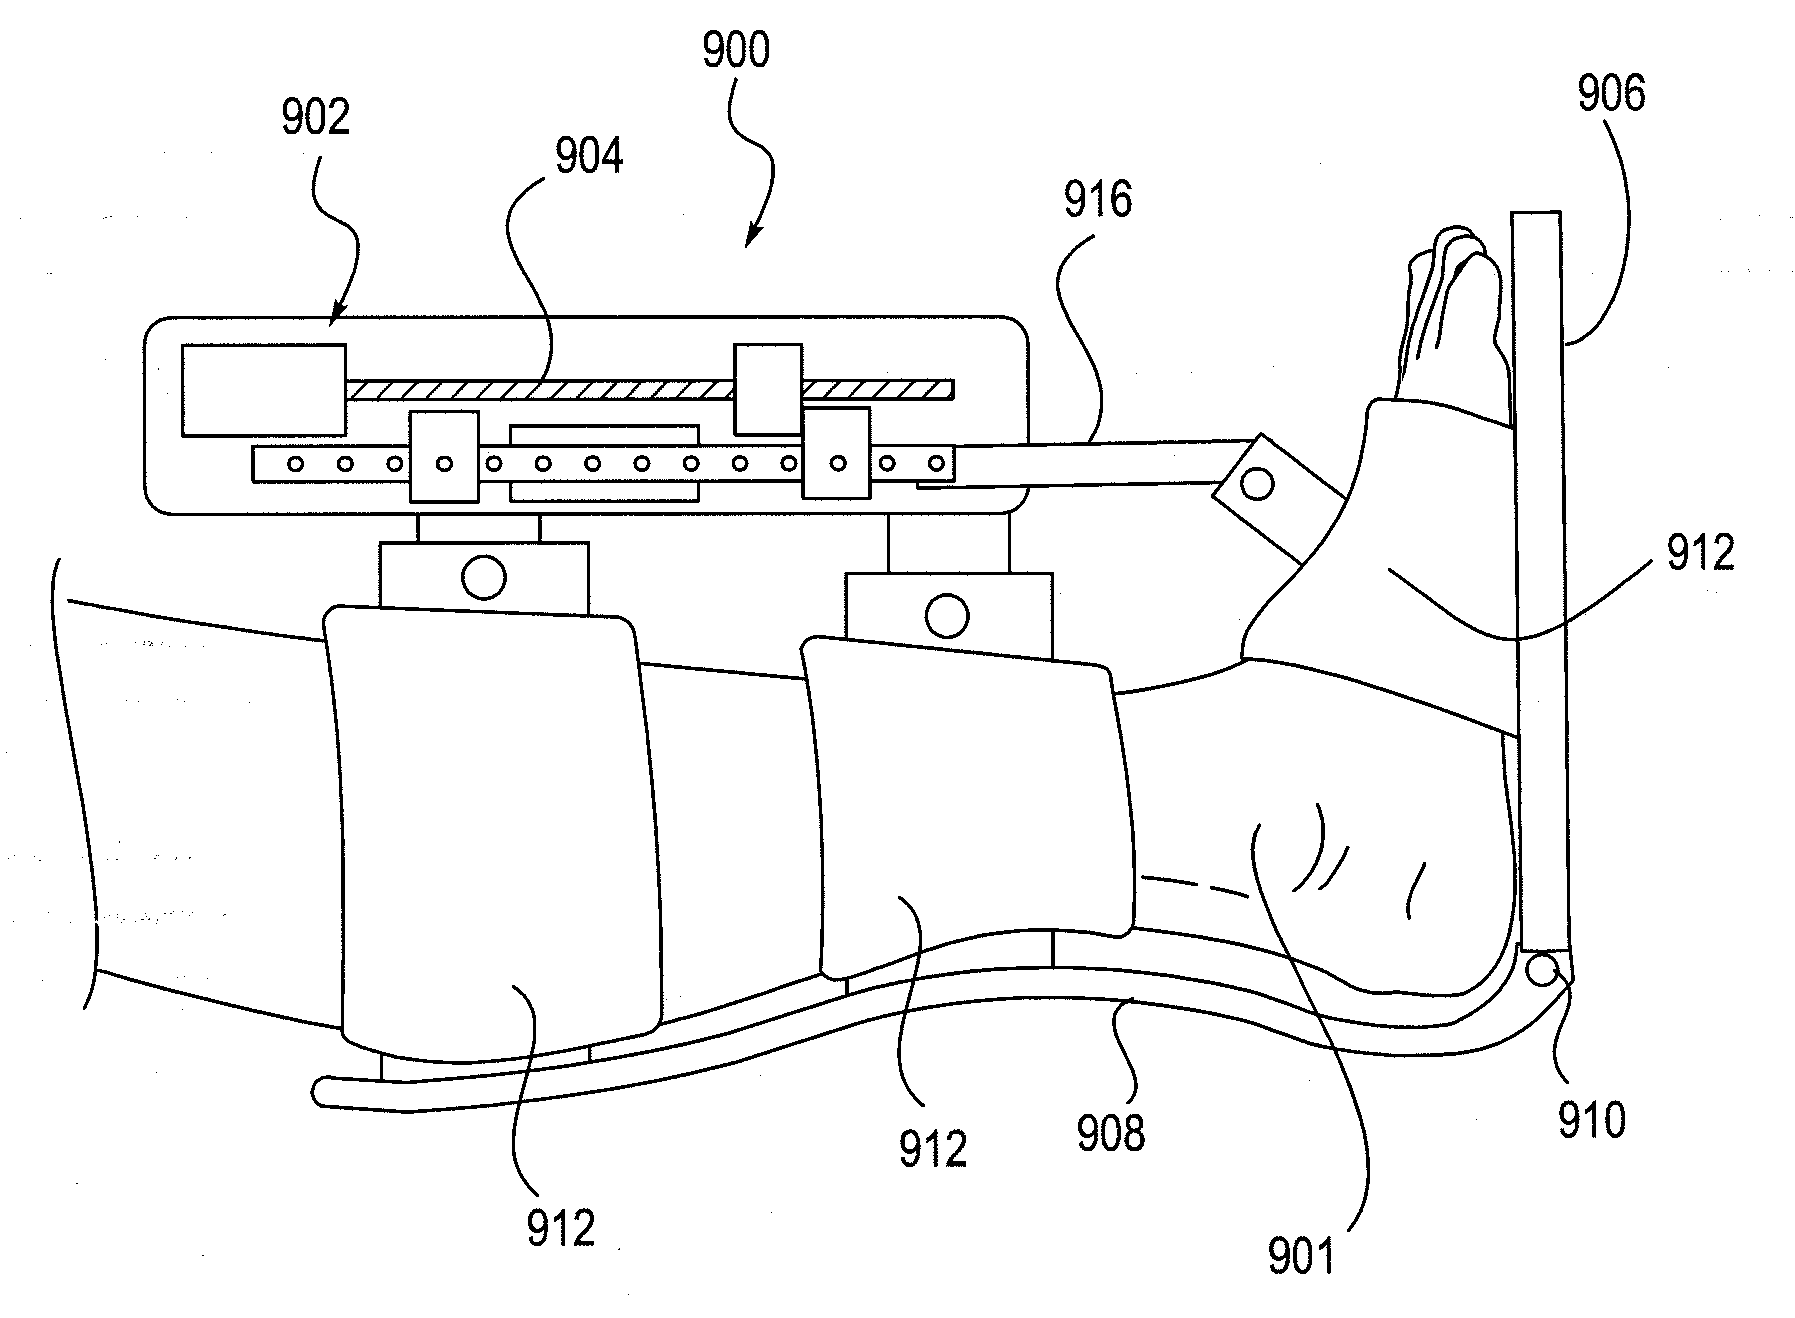 Therapeutic method and device for rehabilitation